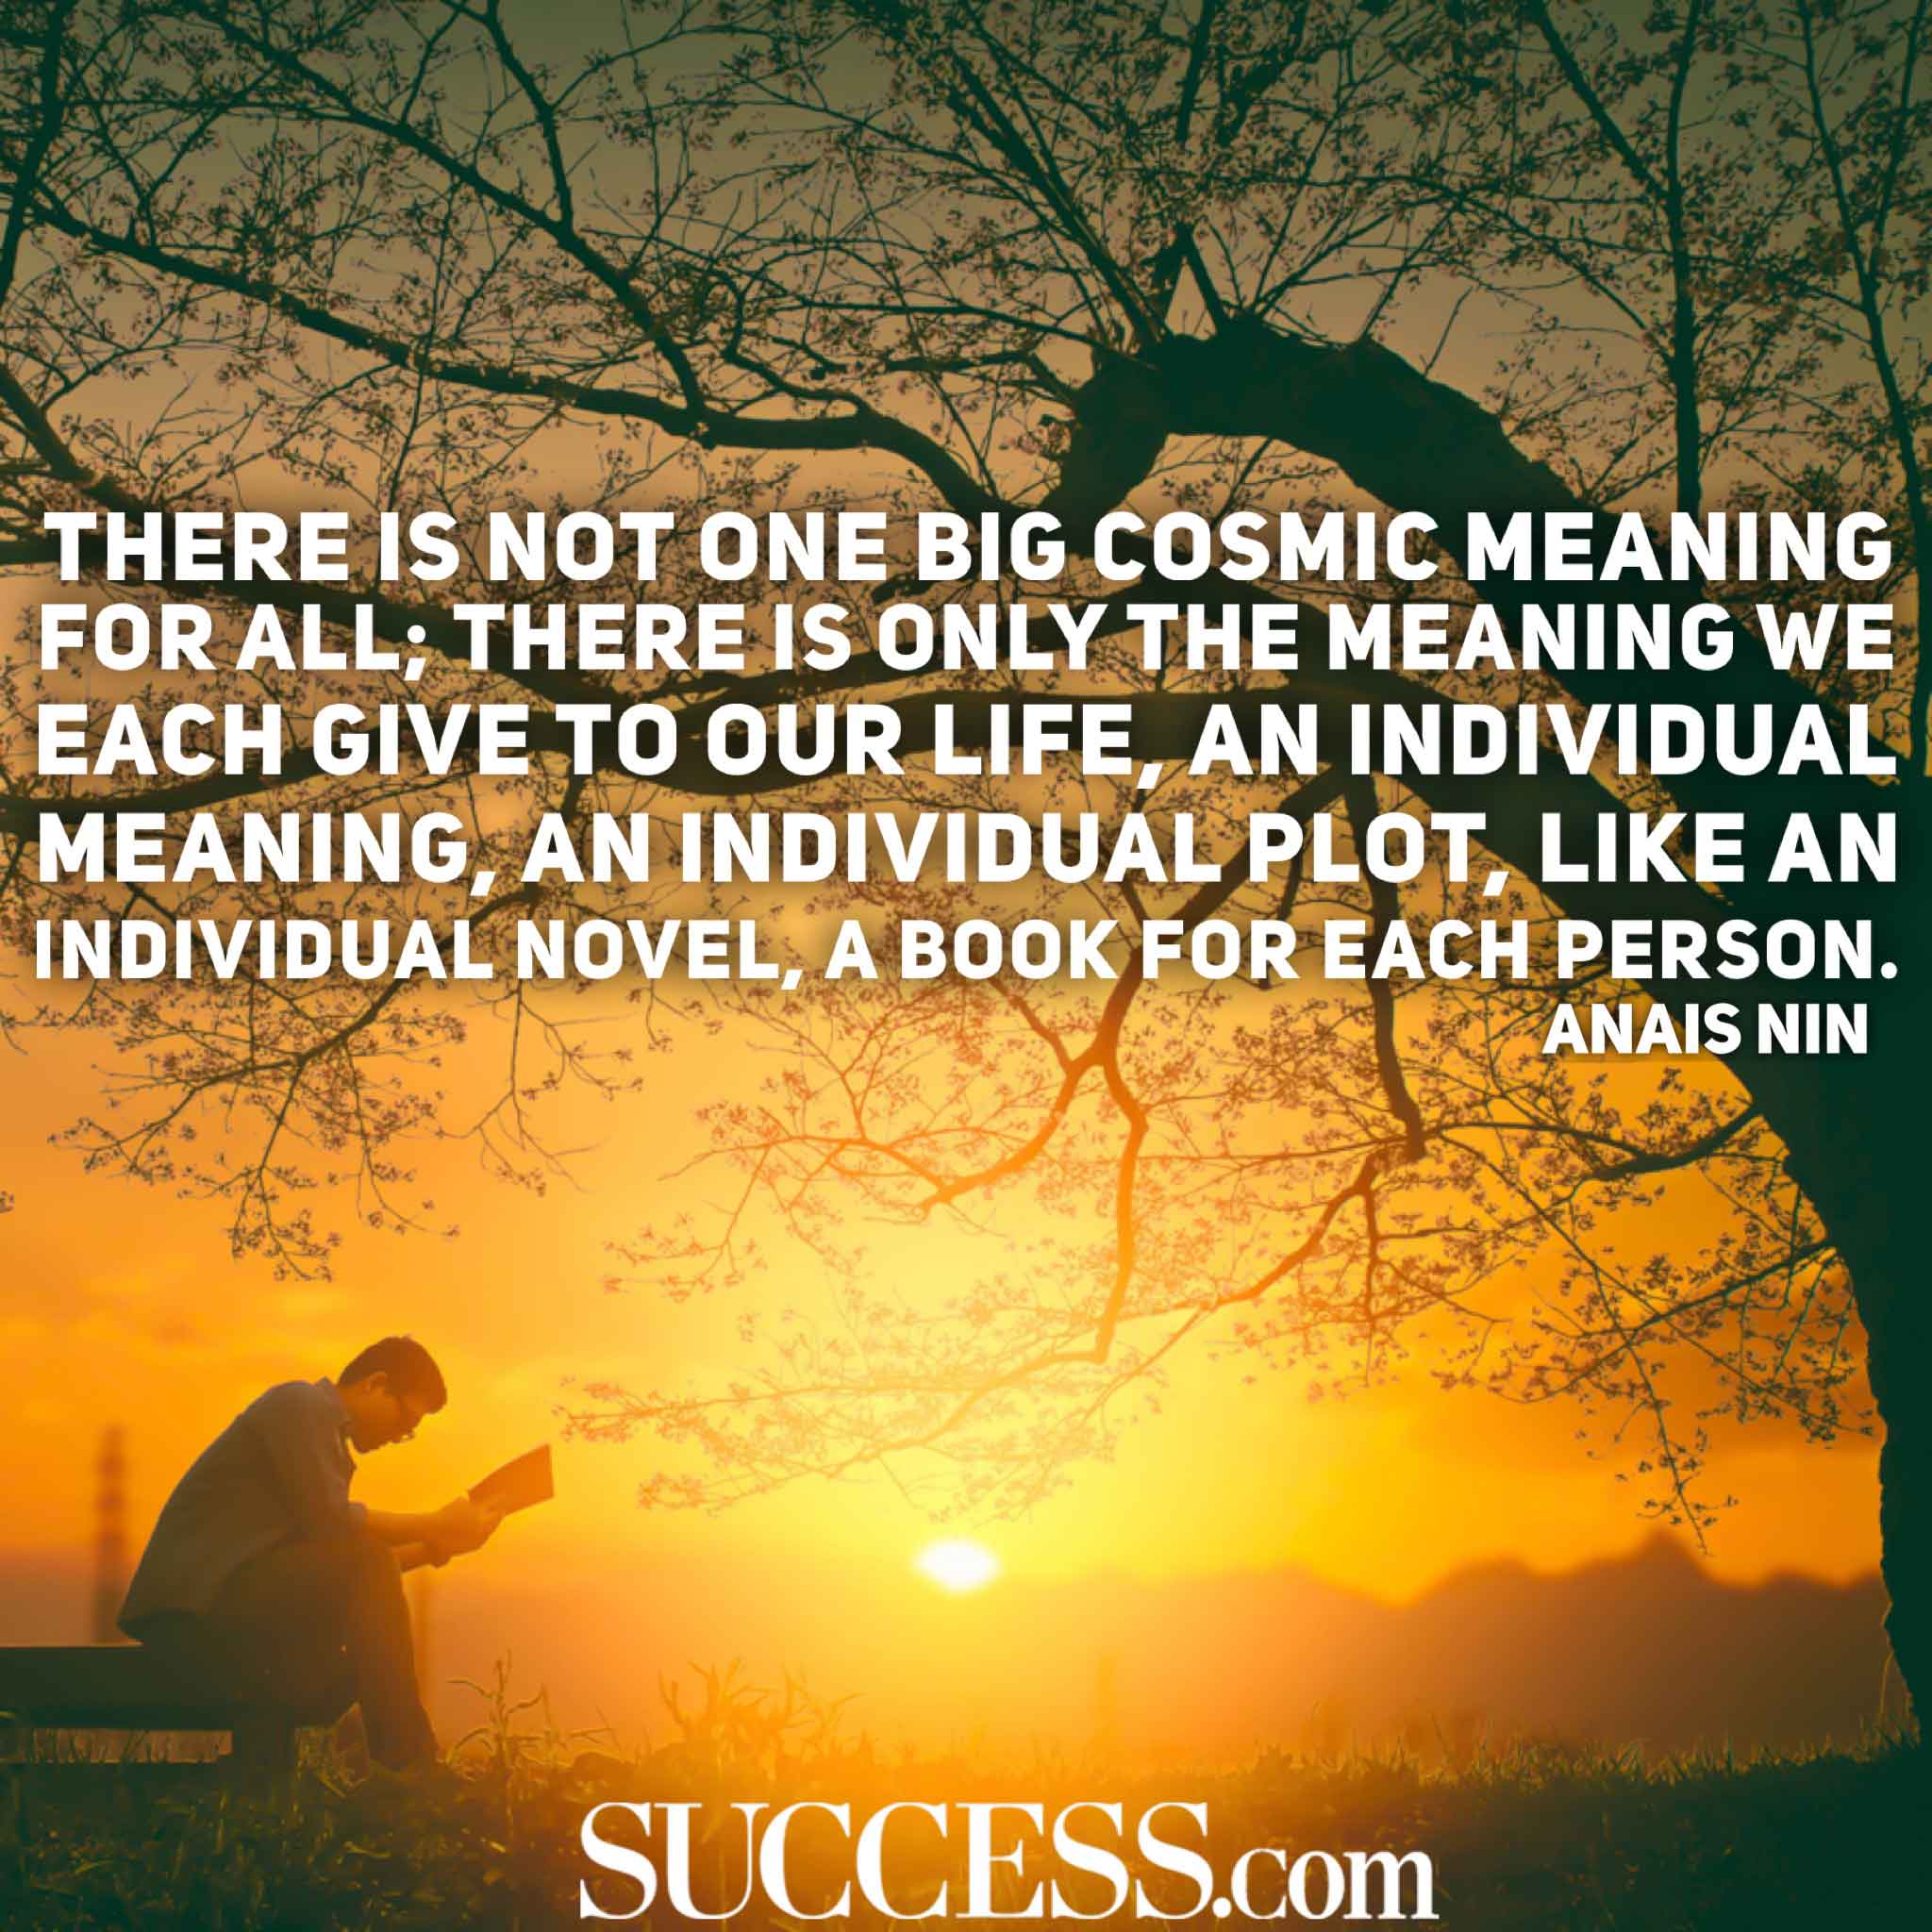 The Meaning of Life in 15 Wise Quotes | SUCCESS